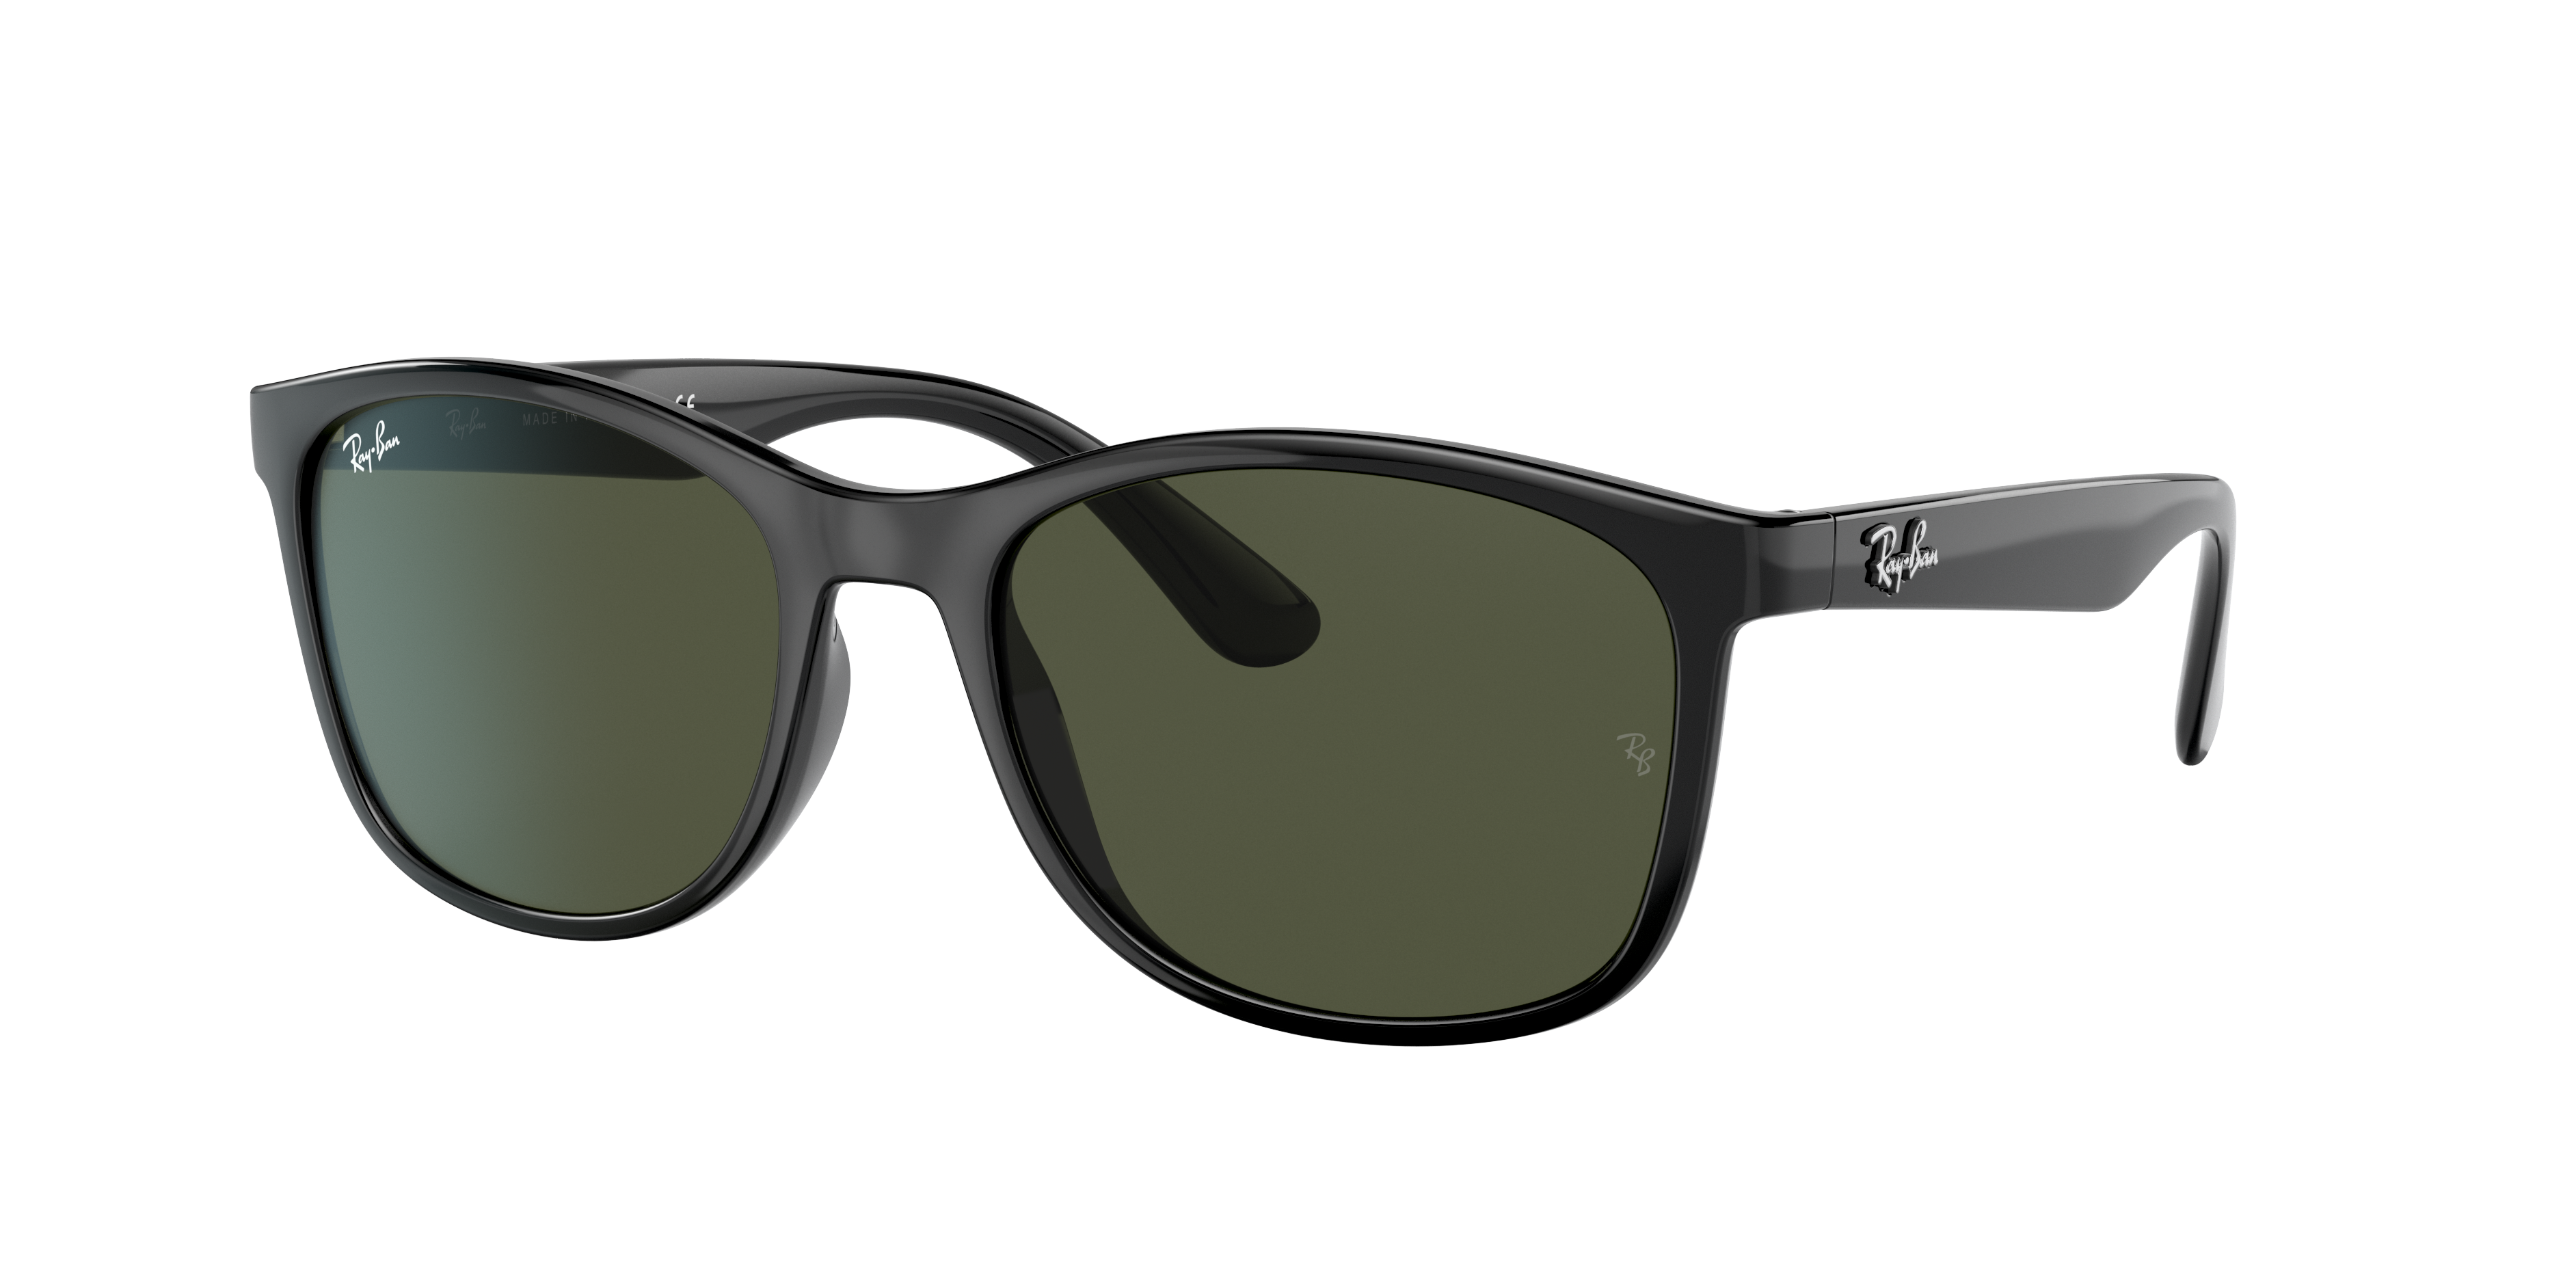 Rb4374 Sunglasses in Black and Green - RB4374F | Ray-Ban®